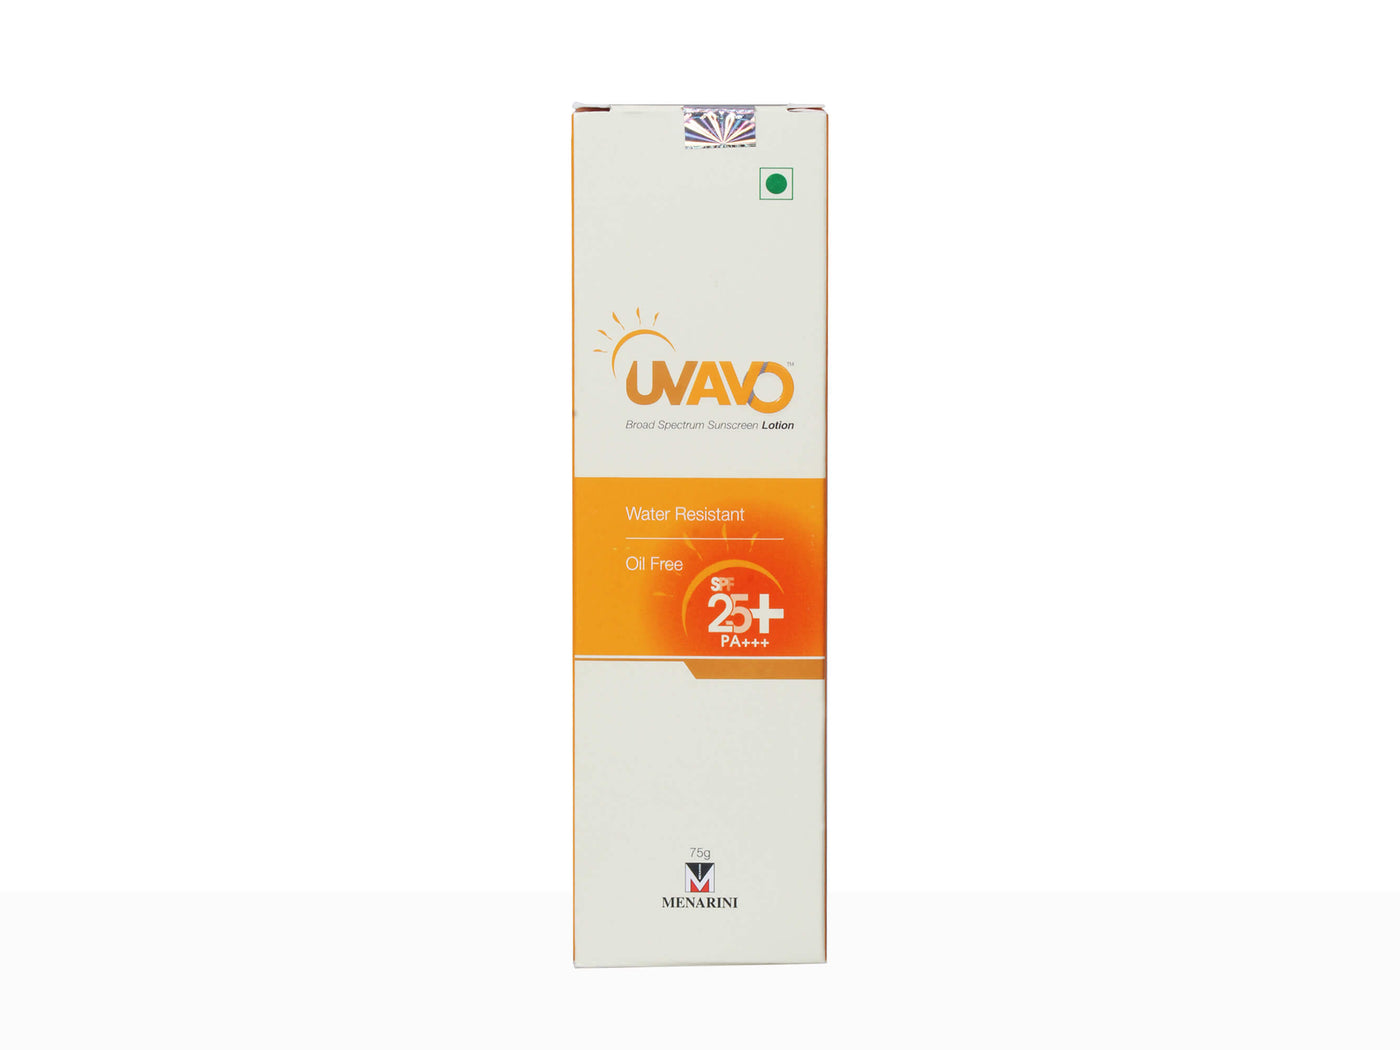 Uvavo Water Resistant Oil Free Sunscreen Lotion SPF 25 PA+++ - Clinikally